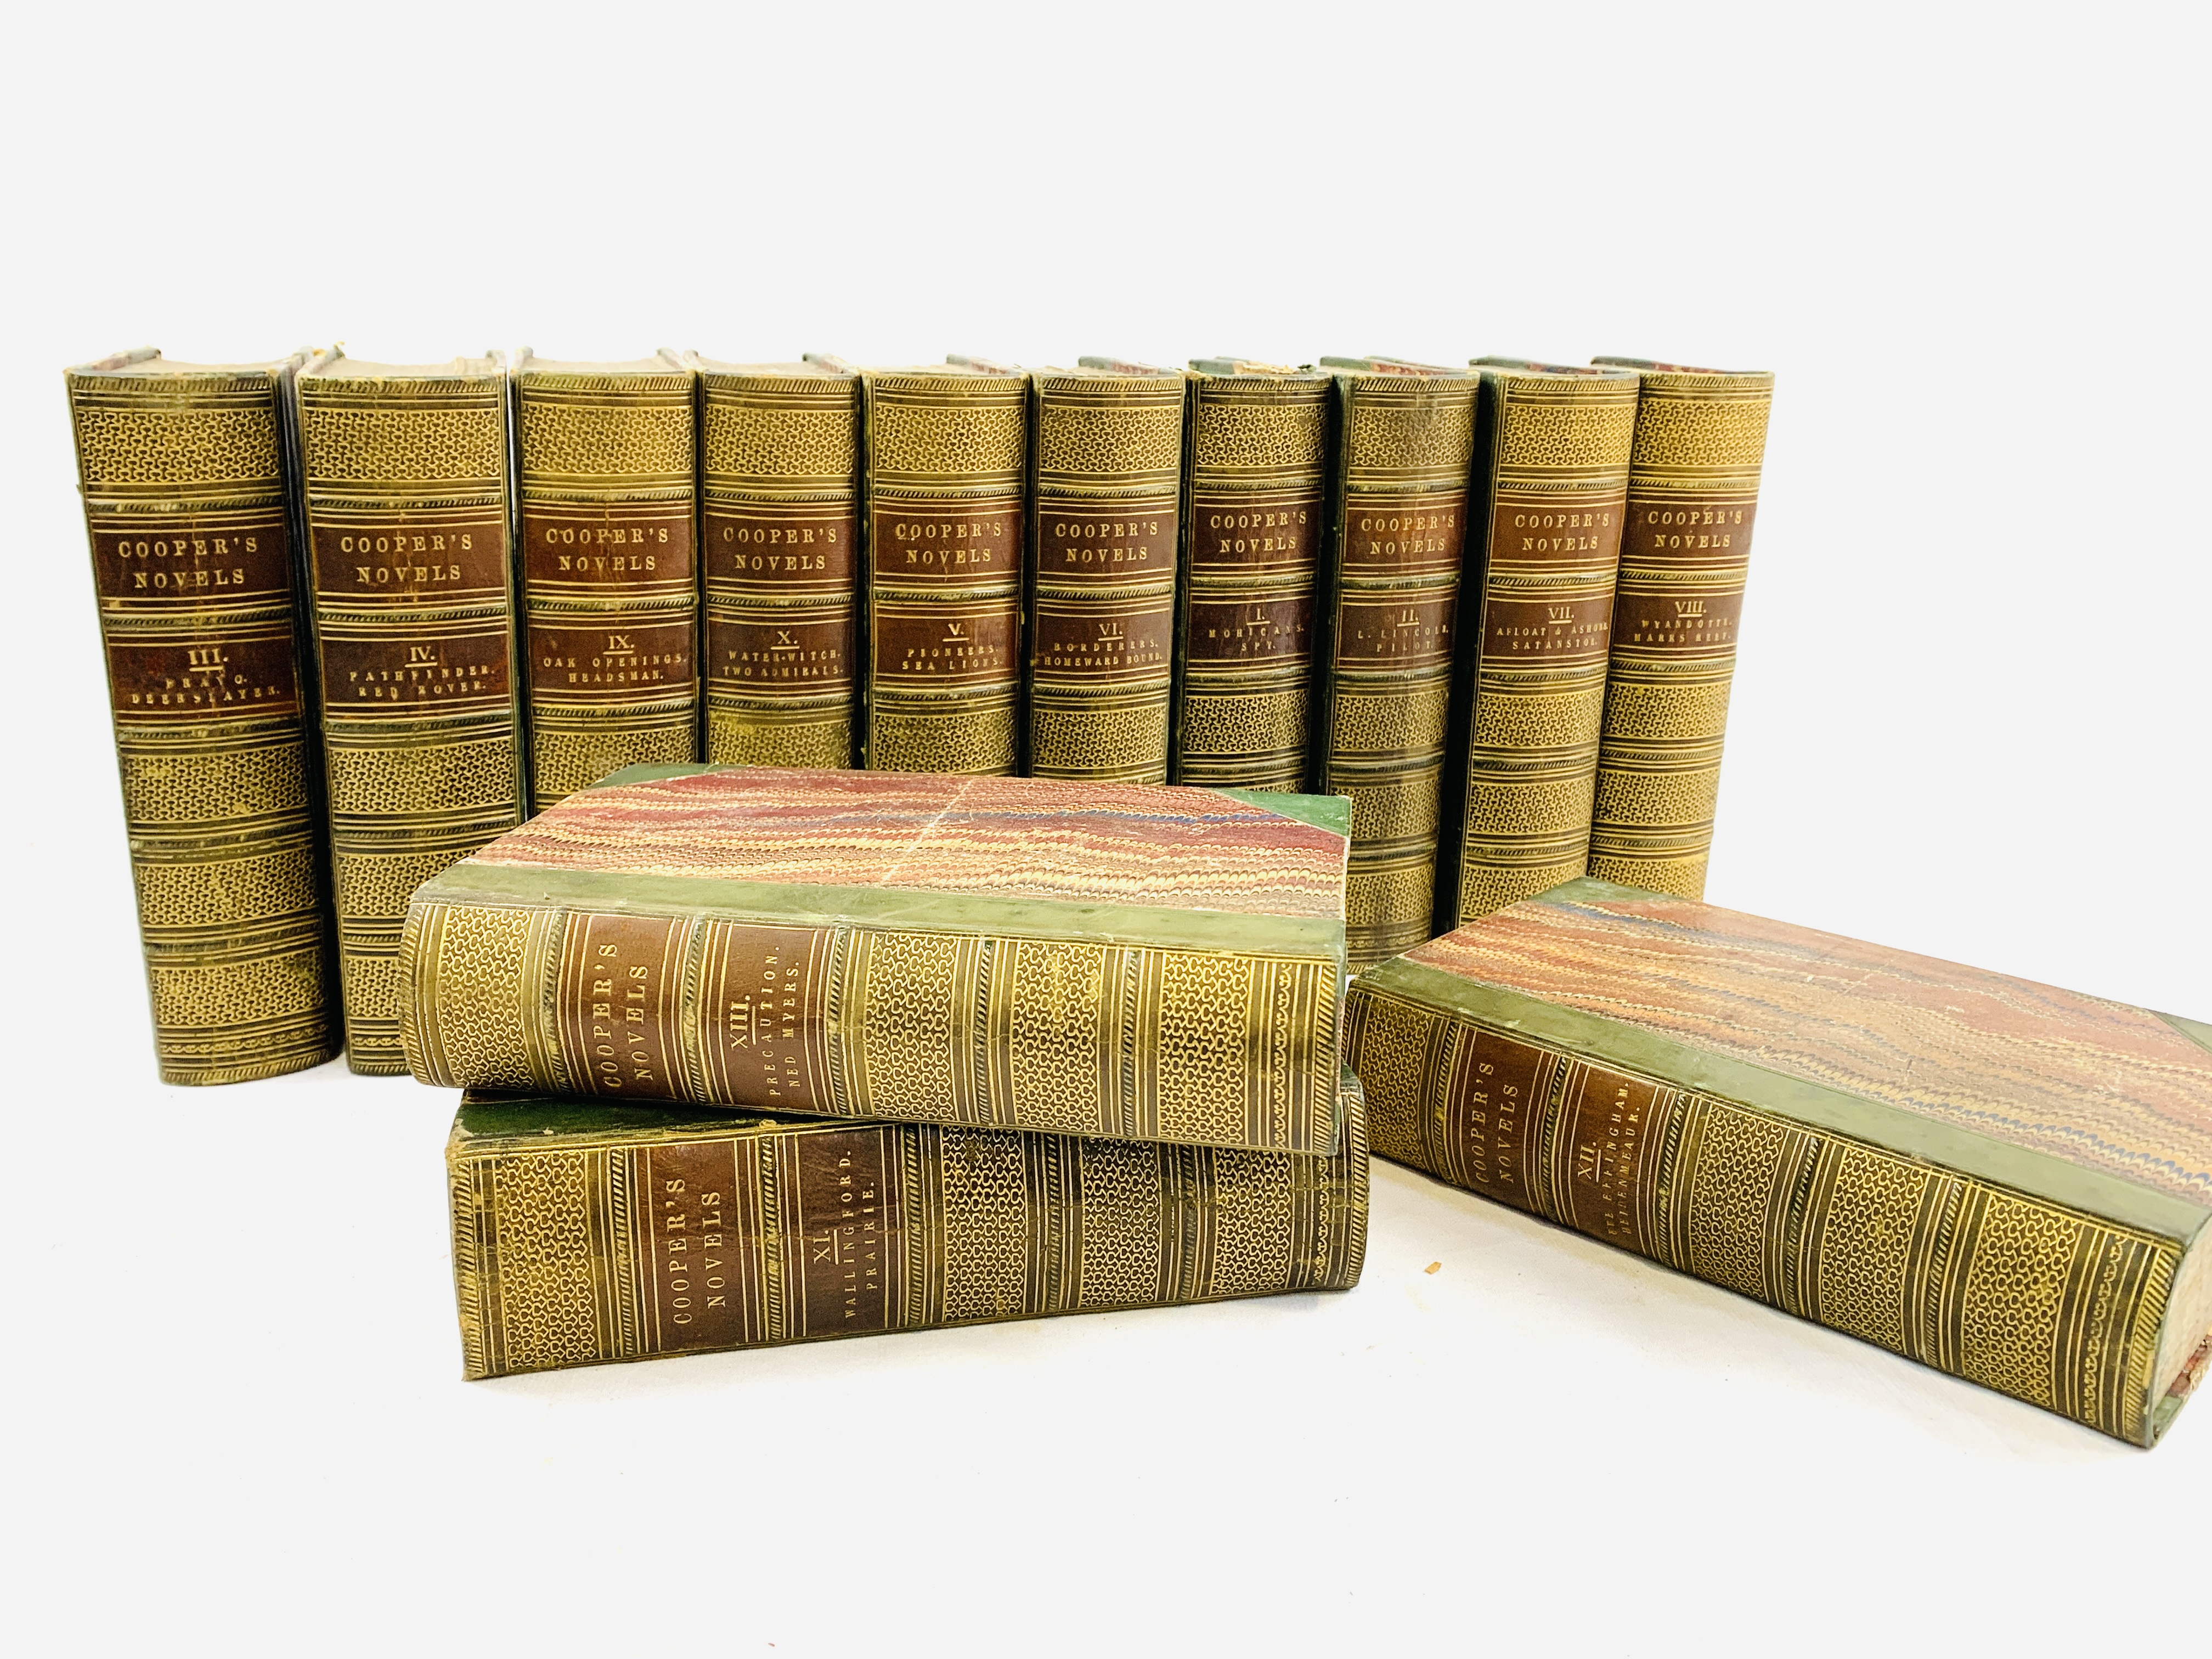 "The Novels & Romances of J Fenimore Cooper", in 13 volumes, published Routledge, Warne & Routledge